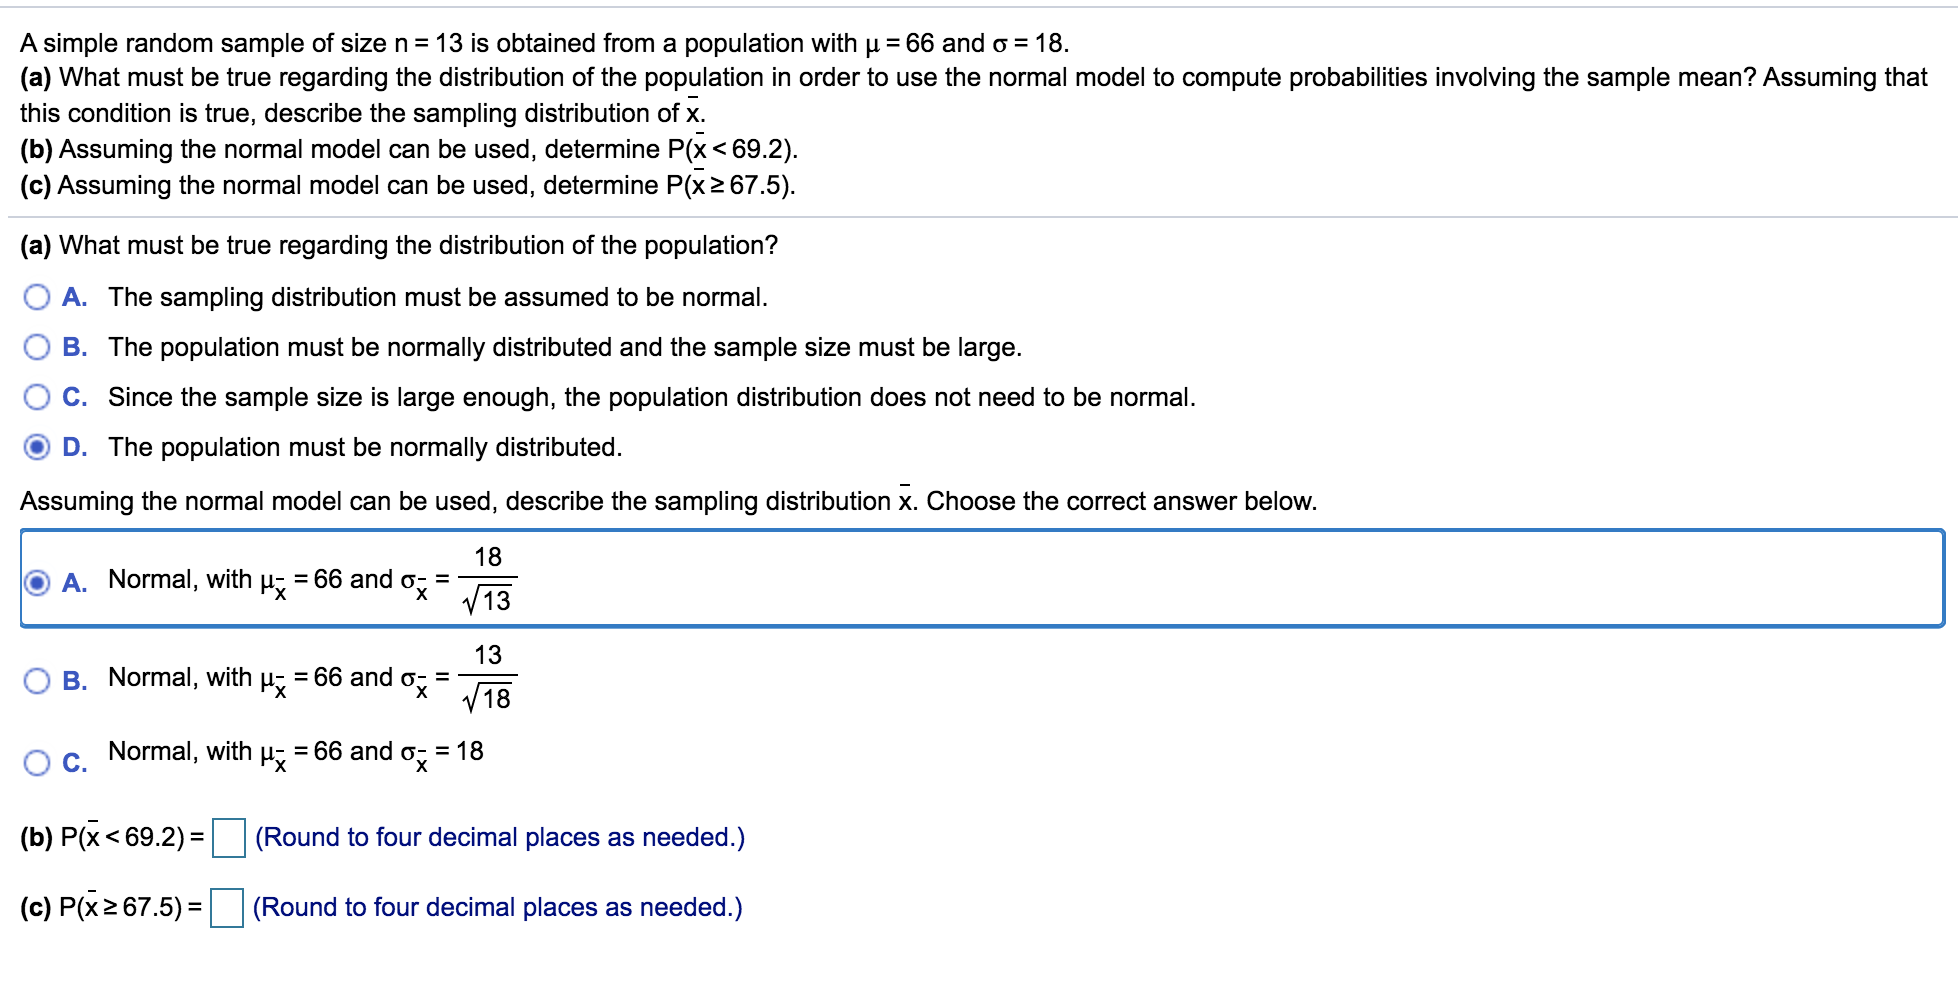 A simple random sample of
IS obtalned from a population with p
(a) What must be true regarding the distribution of the population in order to use the normal model to compute probabilities involving the sample mean? Assuming that
this condition is true, describe the sampling distribution of x.
(b) Assuming the normal model can be used, determine P(x< 69.2).
(c) Assuming the normal model can be used, determine P(x2 67.5).
(a) What must be true regarding the distribution of the population?
A. The sampling distribution must be assumed to be normal.
B. The population must be normally distributed and the sample size must be large.
C. Since the sample size is large enough, the population distribution does not need to be normal.
D. The population must be normally distributed.
Assuming the normal model can be used, describe the sampling distribution x. Choose the correct answer below.
18
A. Normal, with µ̟ = 66 and o;
V13
13
= 66 and o- =
V18
B. Normal, with
Normal, with
= 66 and o = 18
(b) P(x< 69.2) =
(Round to four decimal places as needed.)
%3D
(c) P(x2 67.5) =|
(Round to four decimal places as needed.)
